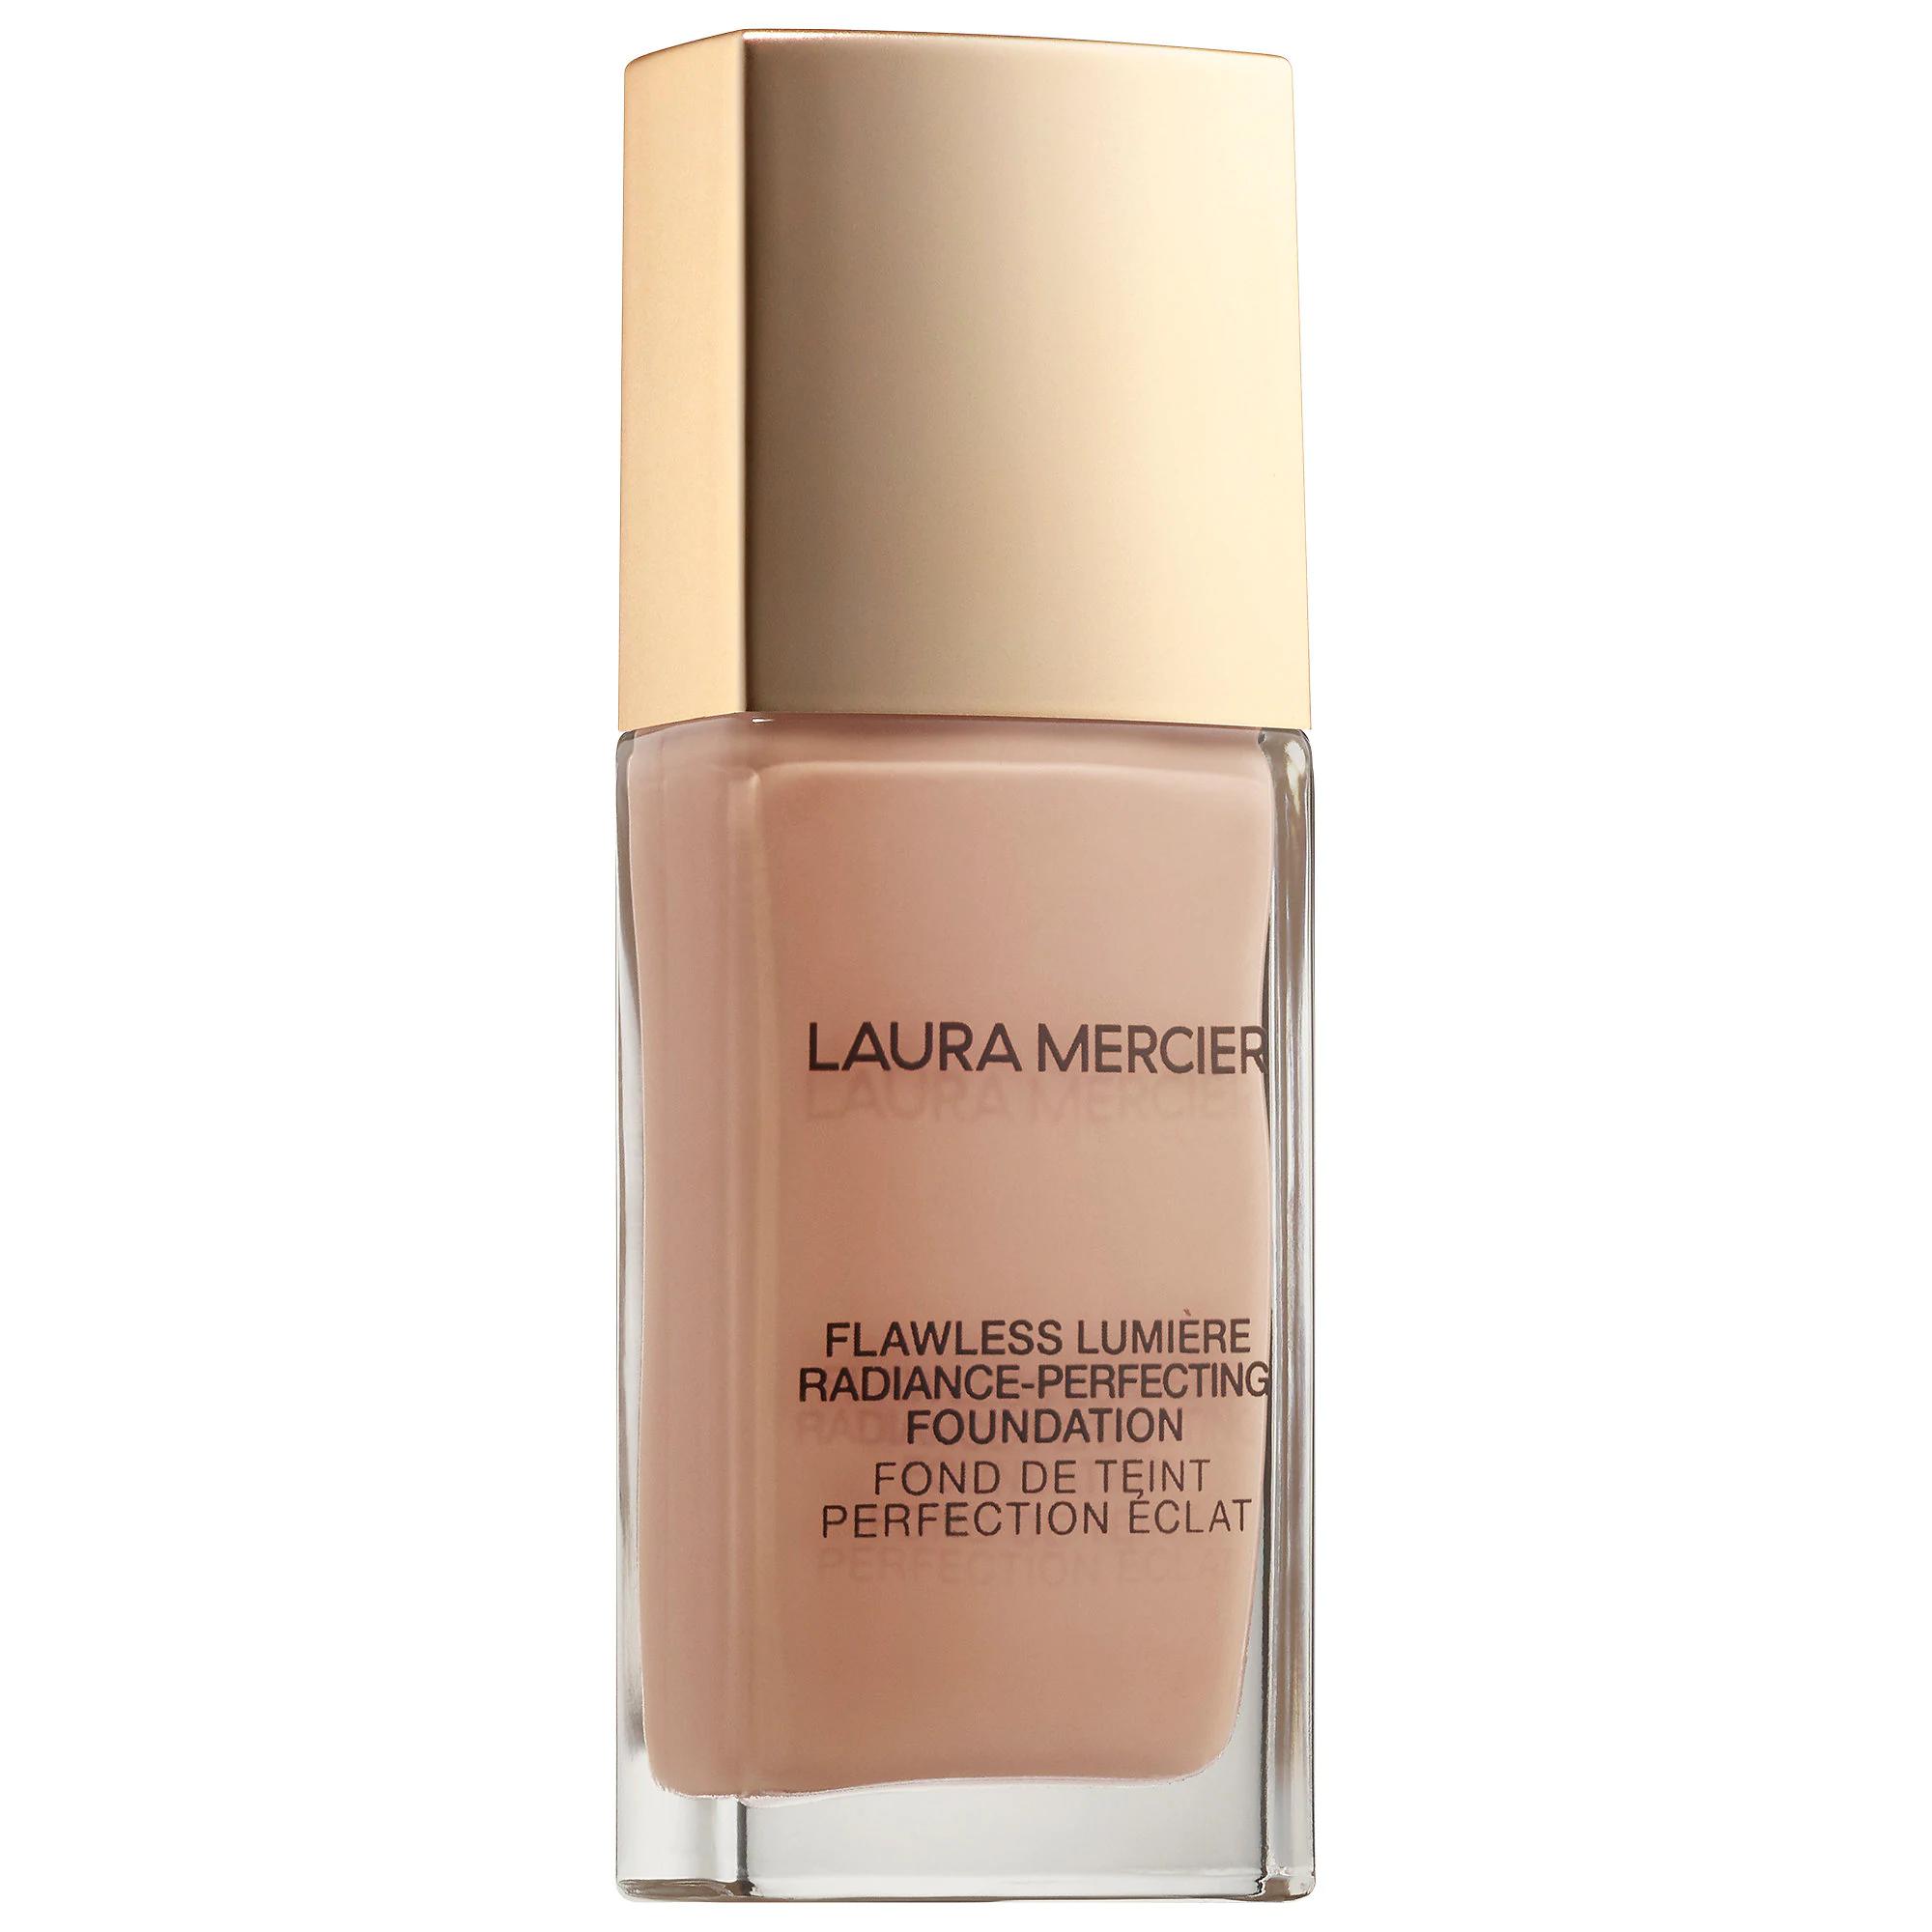 Laura Mercier Flawless Lumiere Radiance-Perfecting Foundation Cameo 1C0